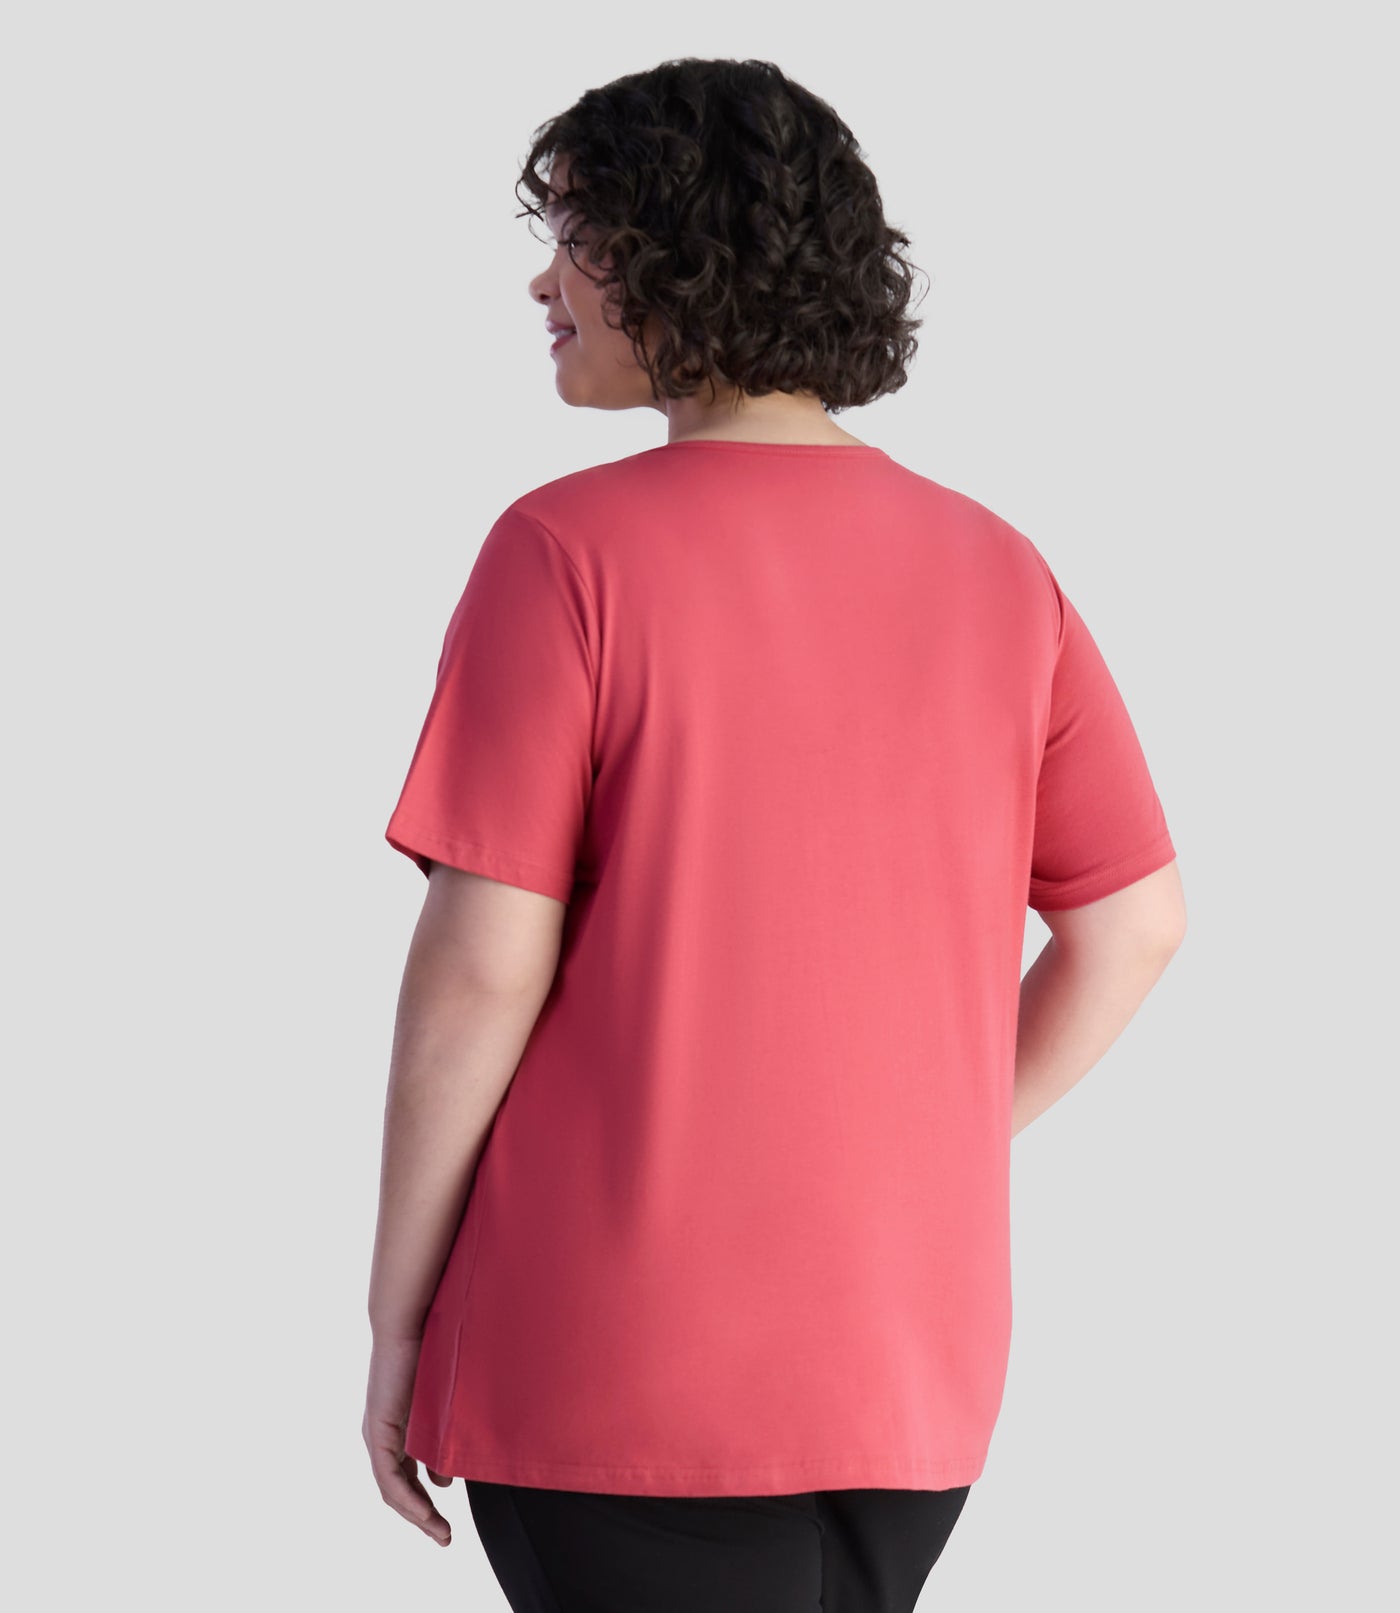 Back of model is wearing JunoActive's designer graphic v-neck top in rosy red.